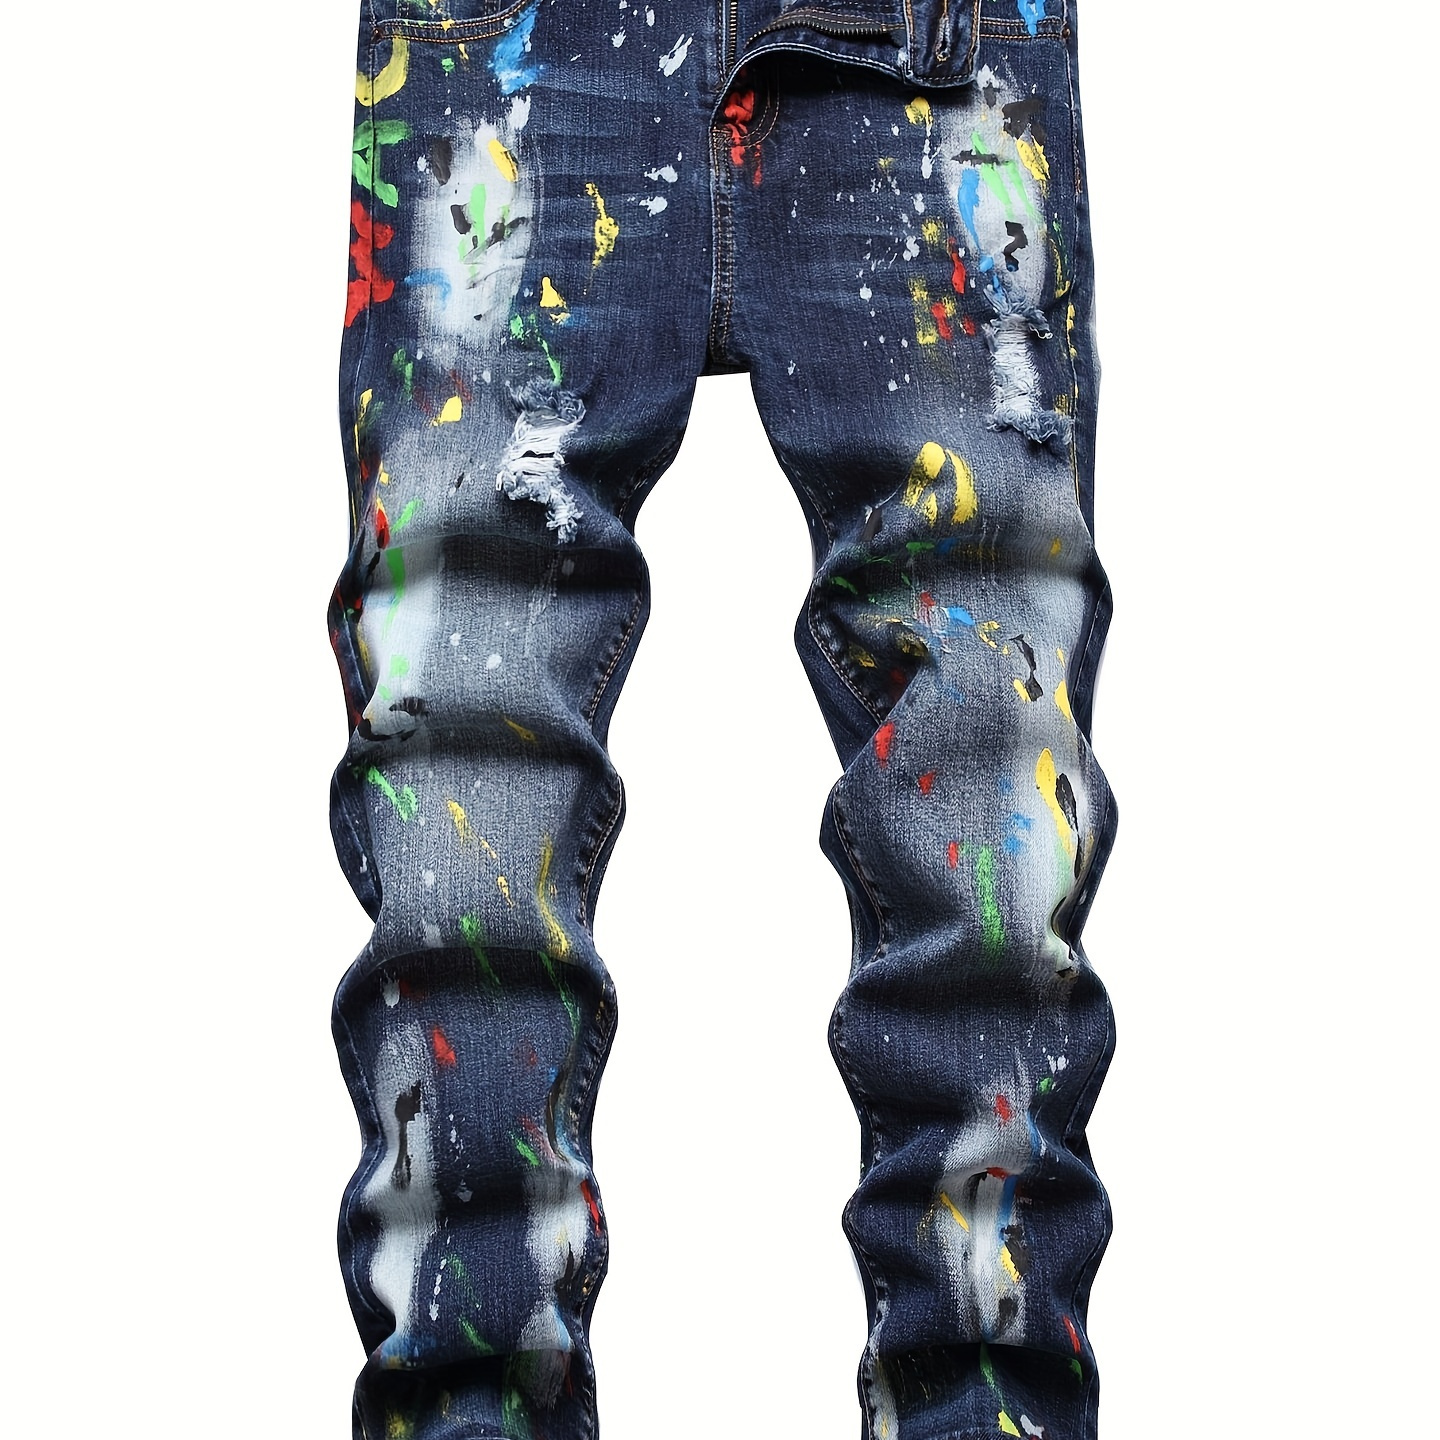 

Boys Street Graffiti Ripped Jeans Skinny Slim Fit Washed Denim Long Pants, Kids Clothing Outdoor